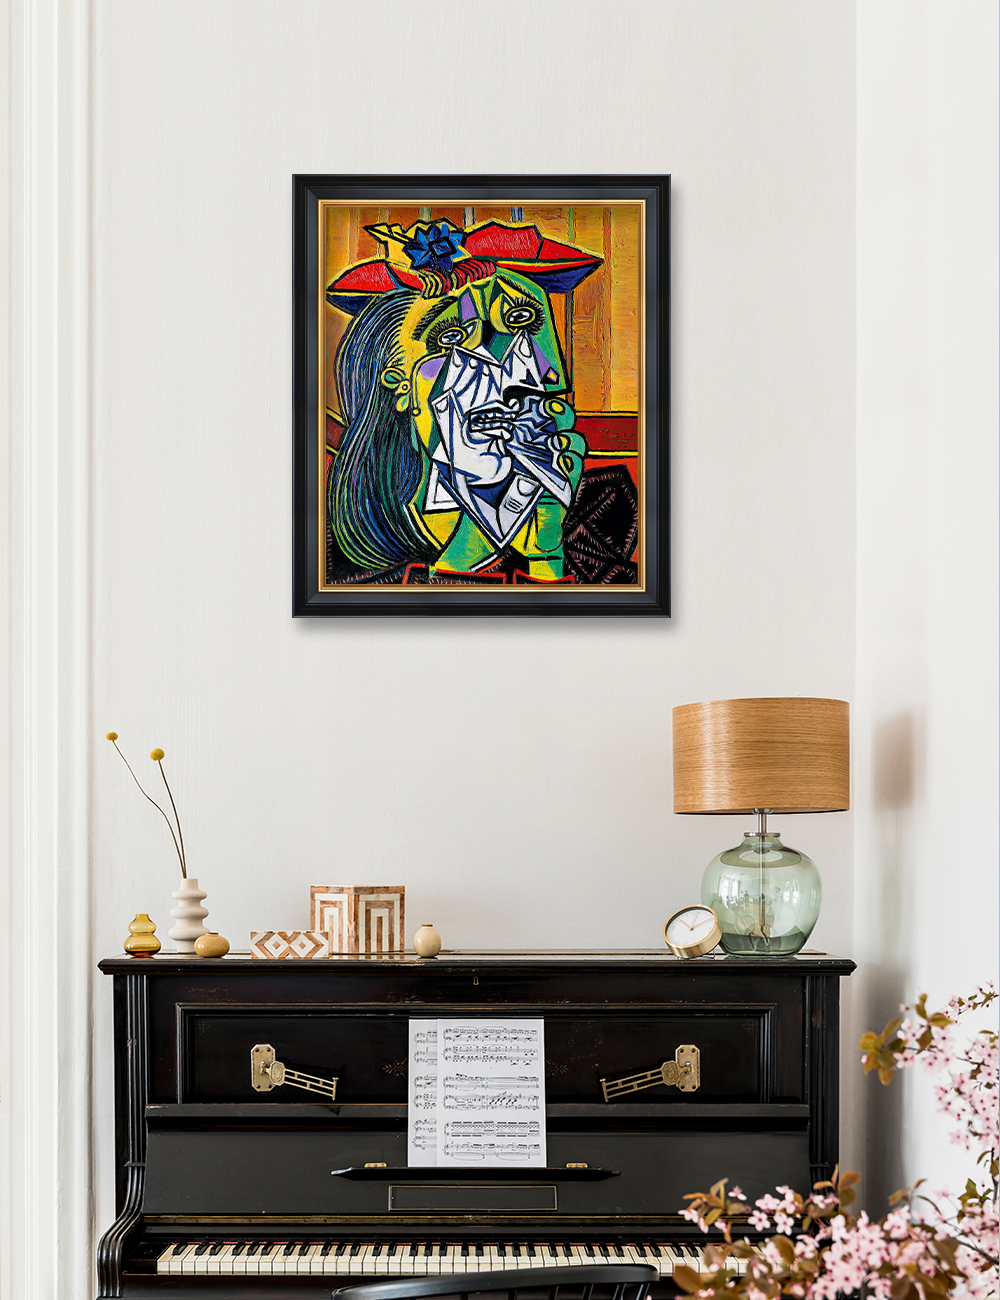 DECORARTS The Weeping Woman by Pablo Picasso, Giclee Print on Acid Free  Canvas with Matching Solid Wood Frame, Framed Artwork for Wall Decor. Total  Framed Size: W 23.25